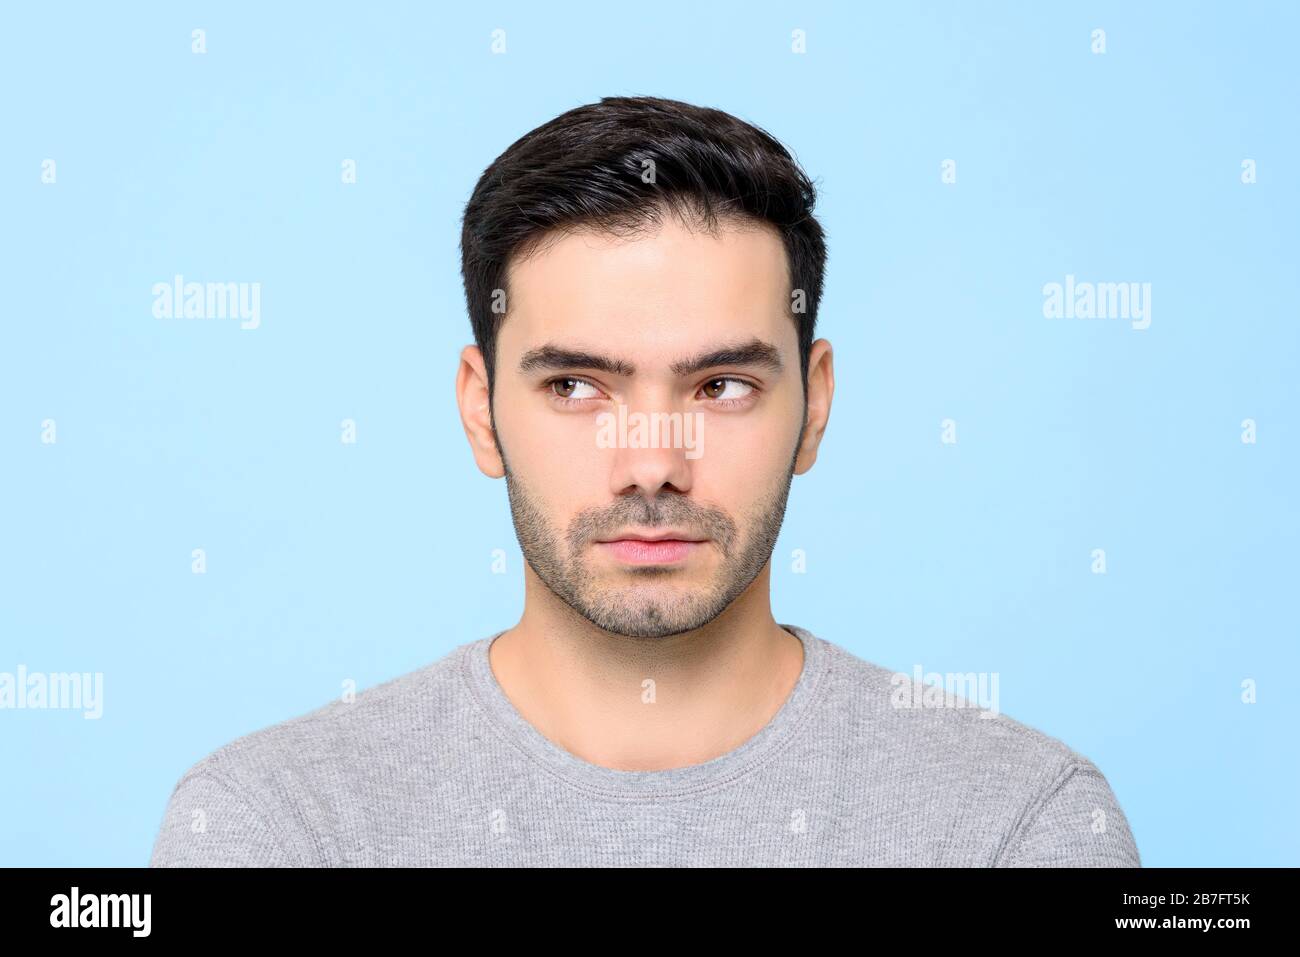 Close up portrait of handsome man thinking with eyes looking sideways isolated on blue studio background Stock Photo